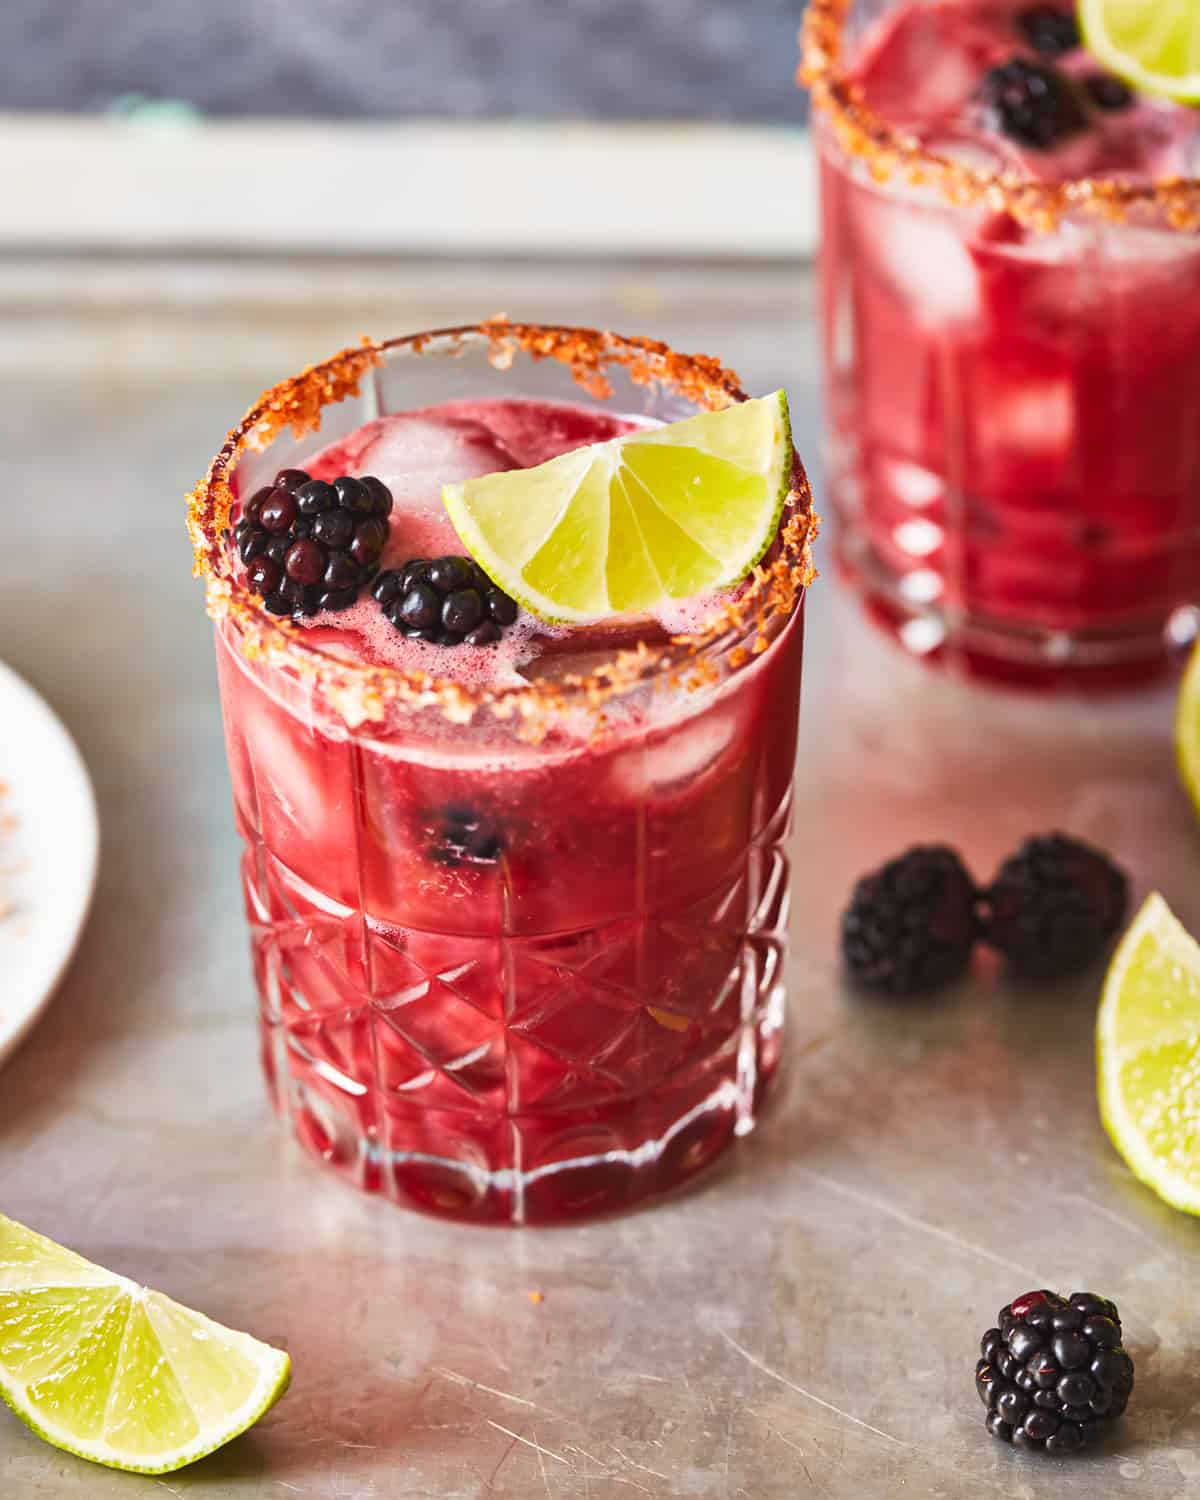 three-quarters view of a blackberry margarita in a short glass with a chili salt rim and blackberry and lime wedge garnish.